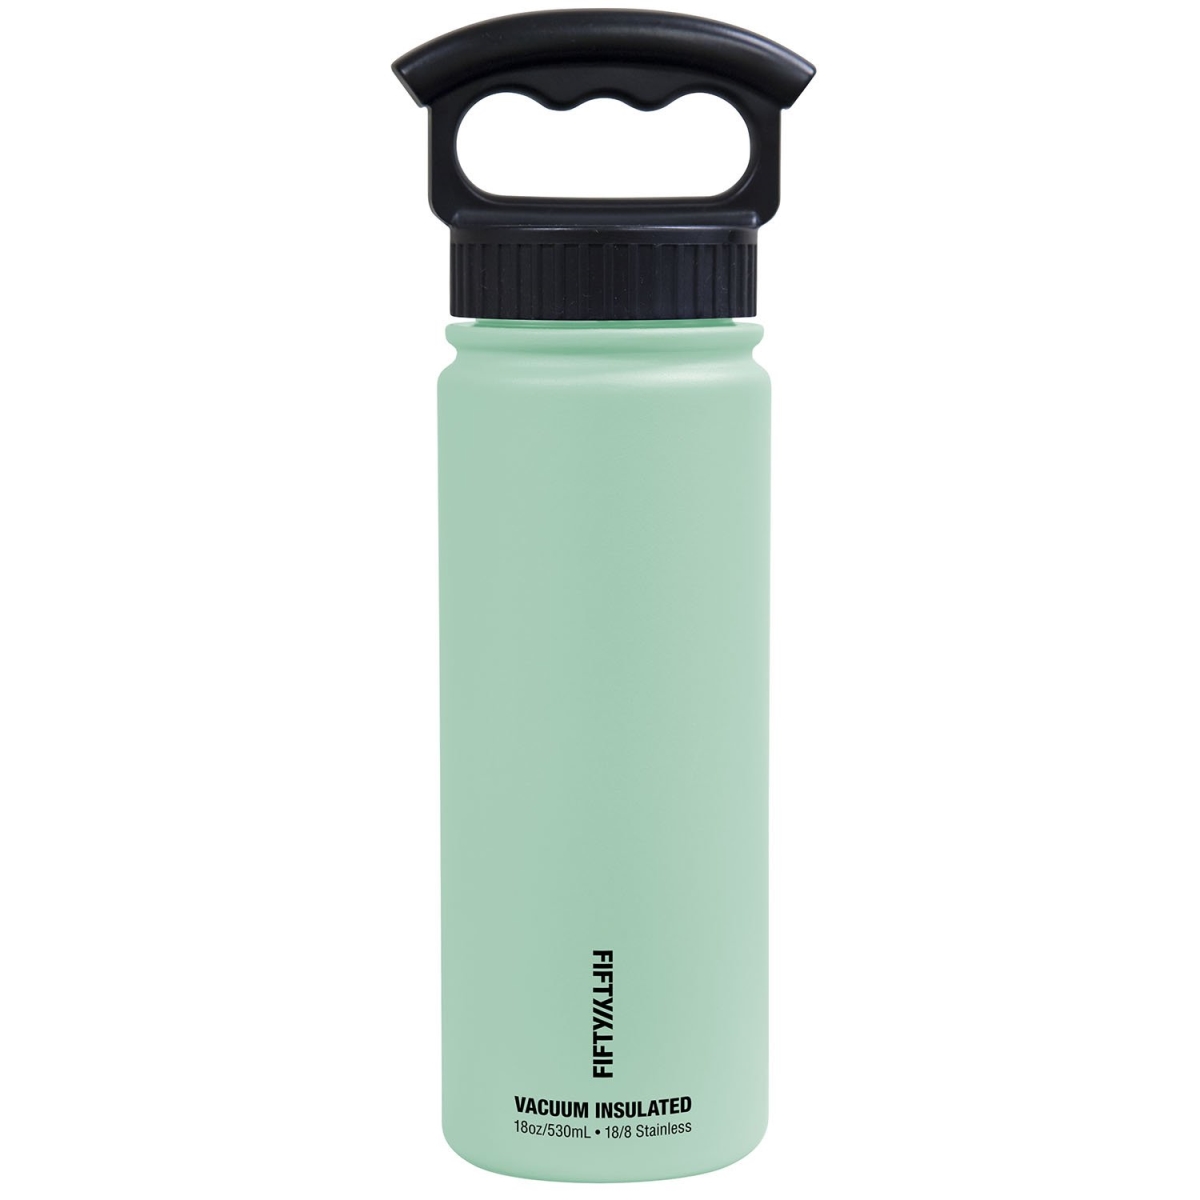 V18006mn0 18 Oz Double-wall Vacuum-insulated Bottles With 3 Finger Grip Cap, Cool Mint